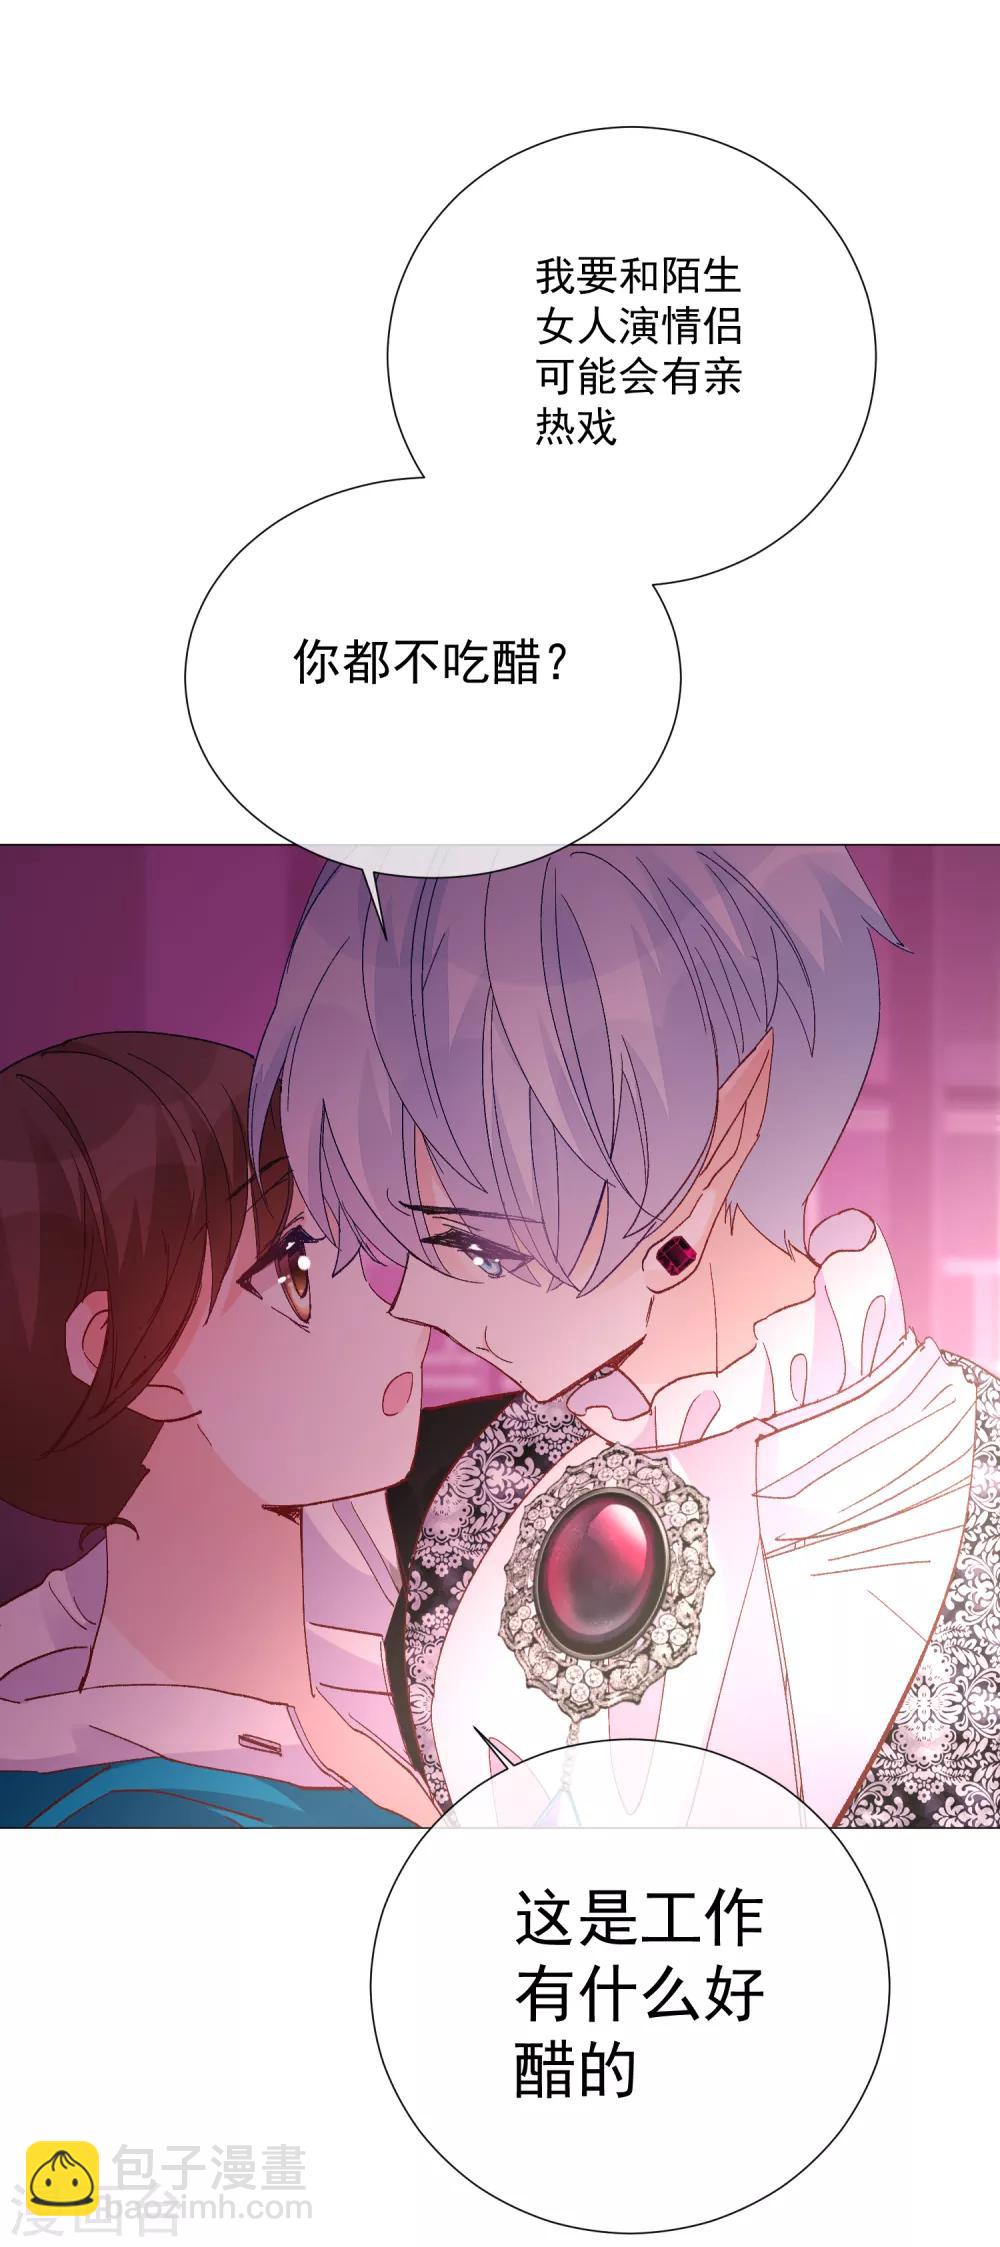 One Kiss A Day - 第59話 新的挑戰 - 6